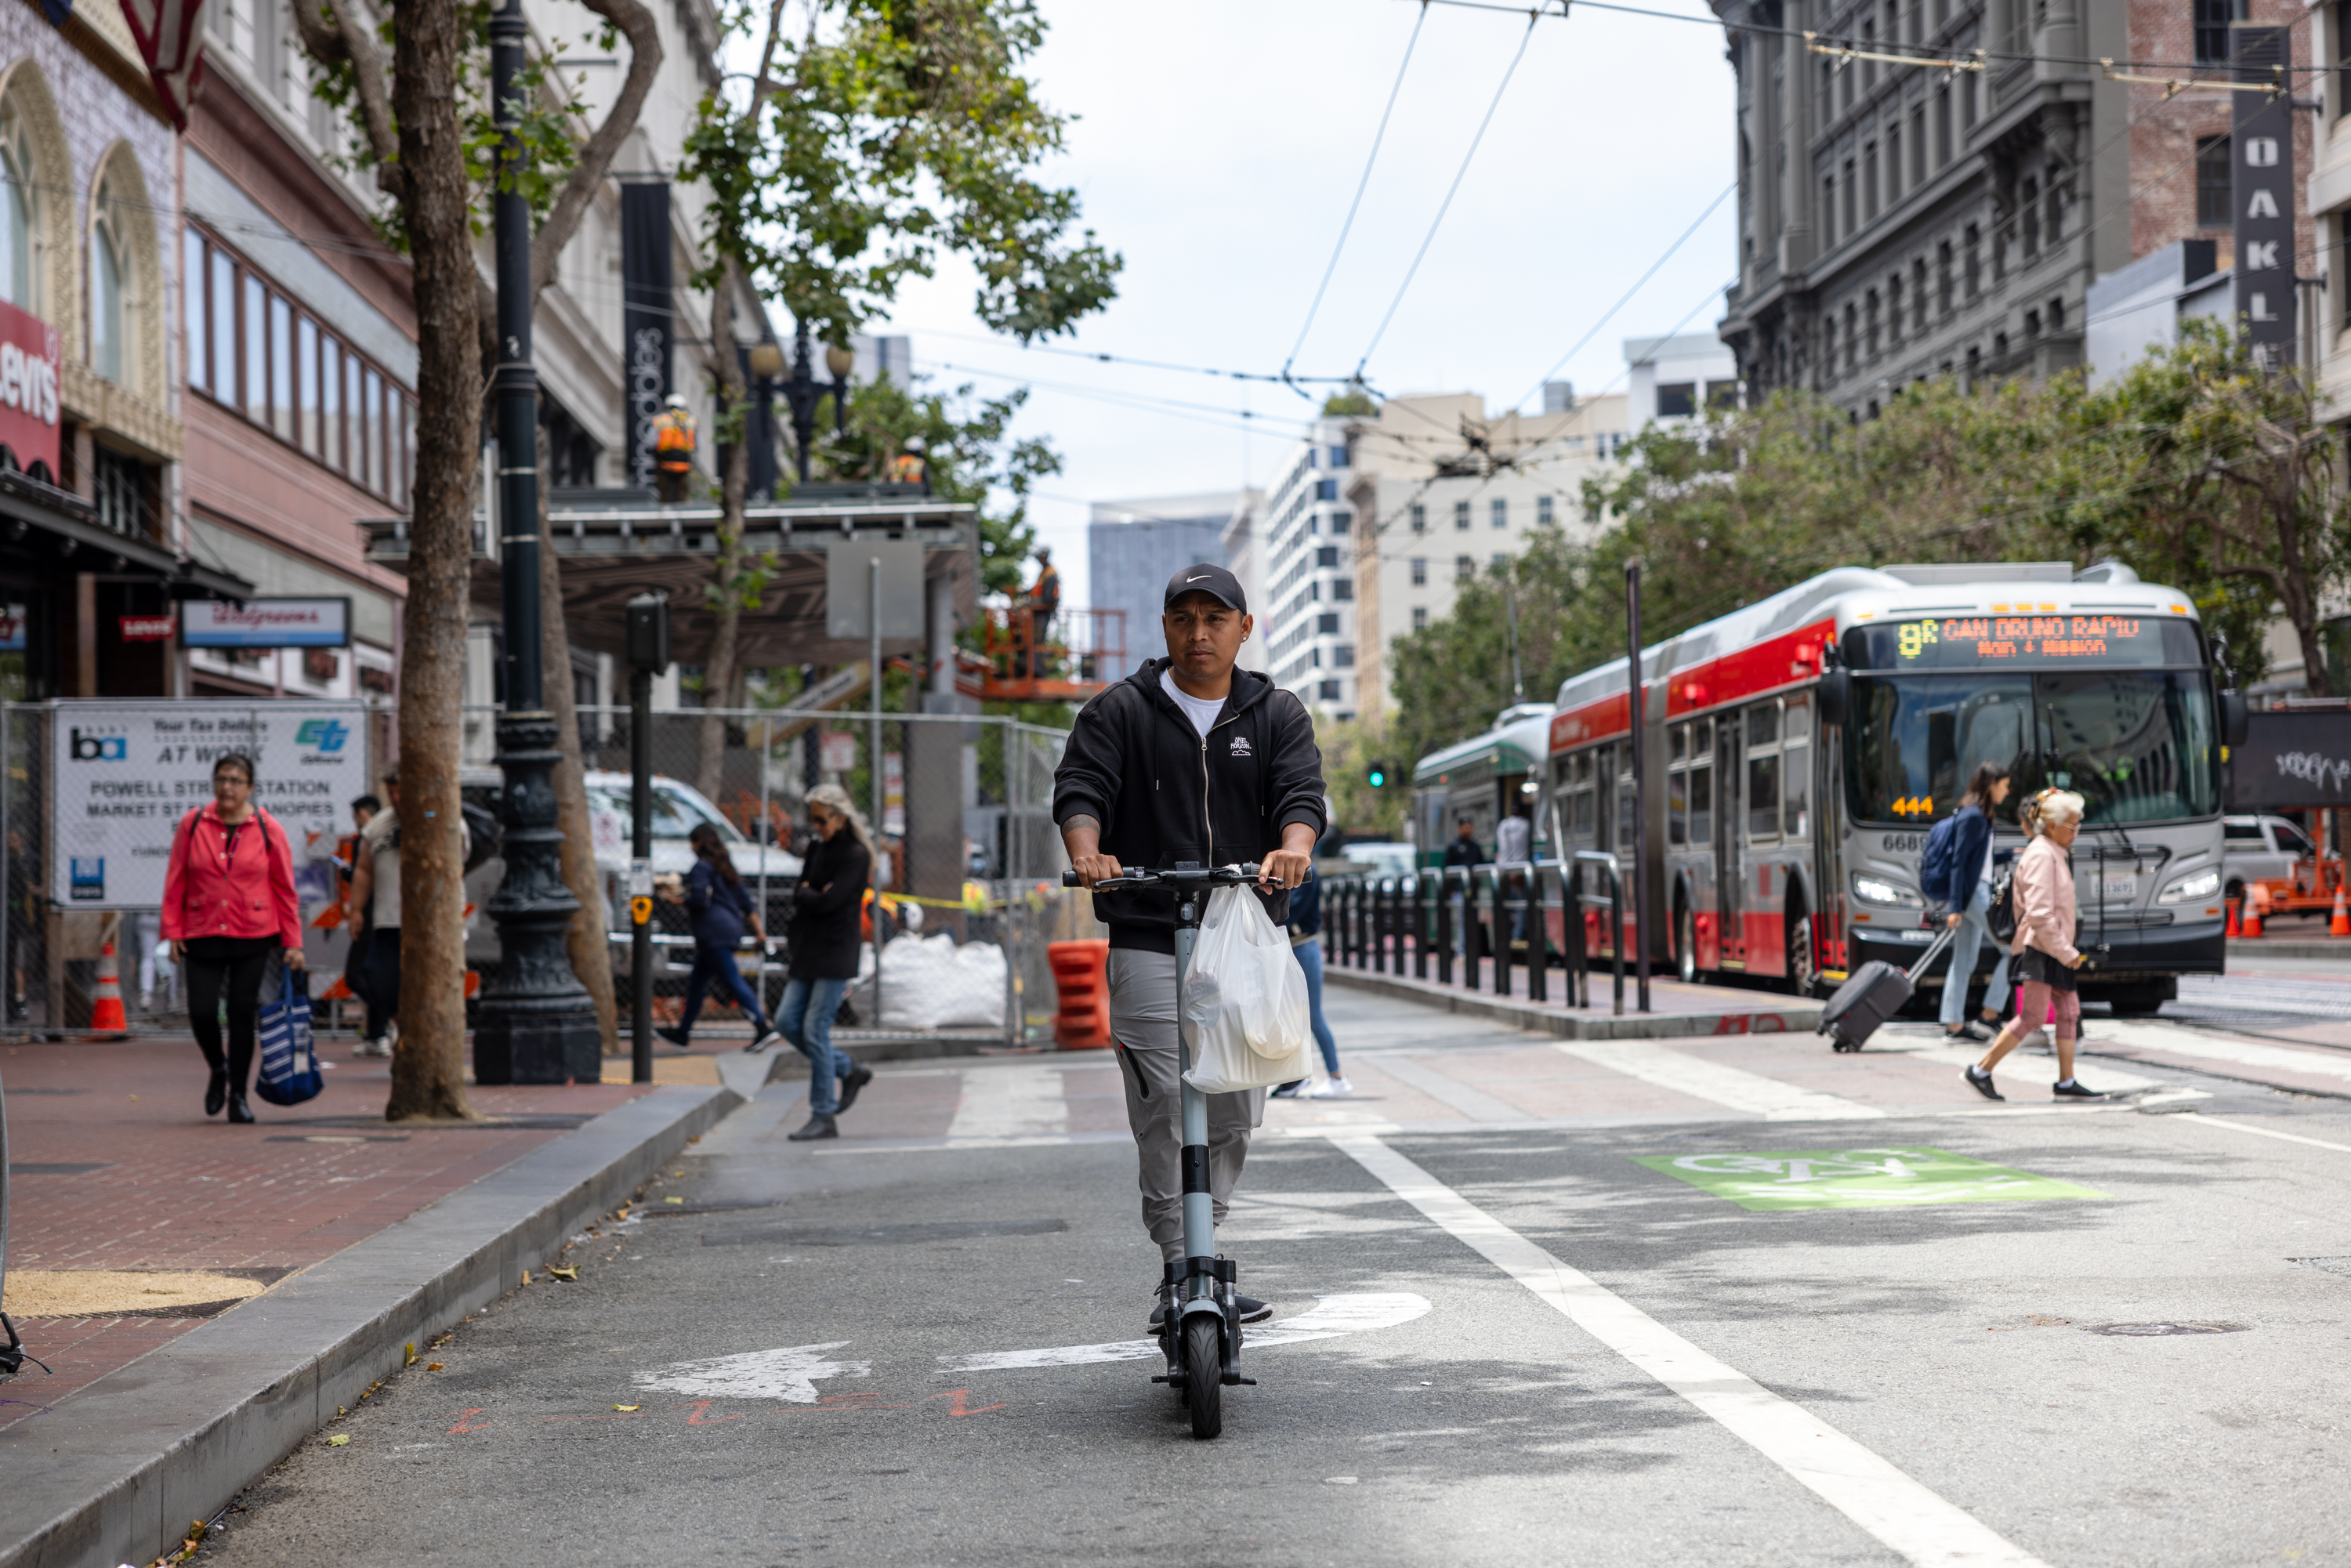 A person on a scooter on Market Street with a bus and pedestrians in the background.